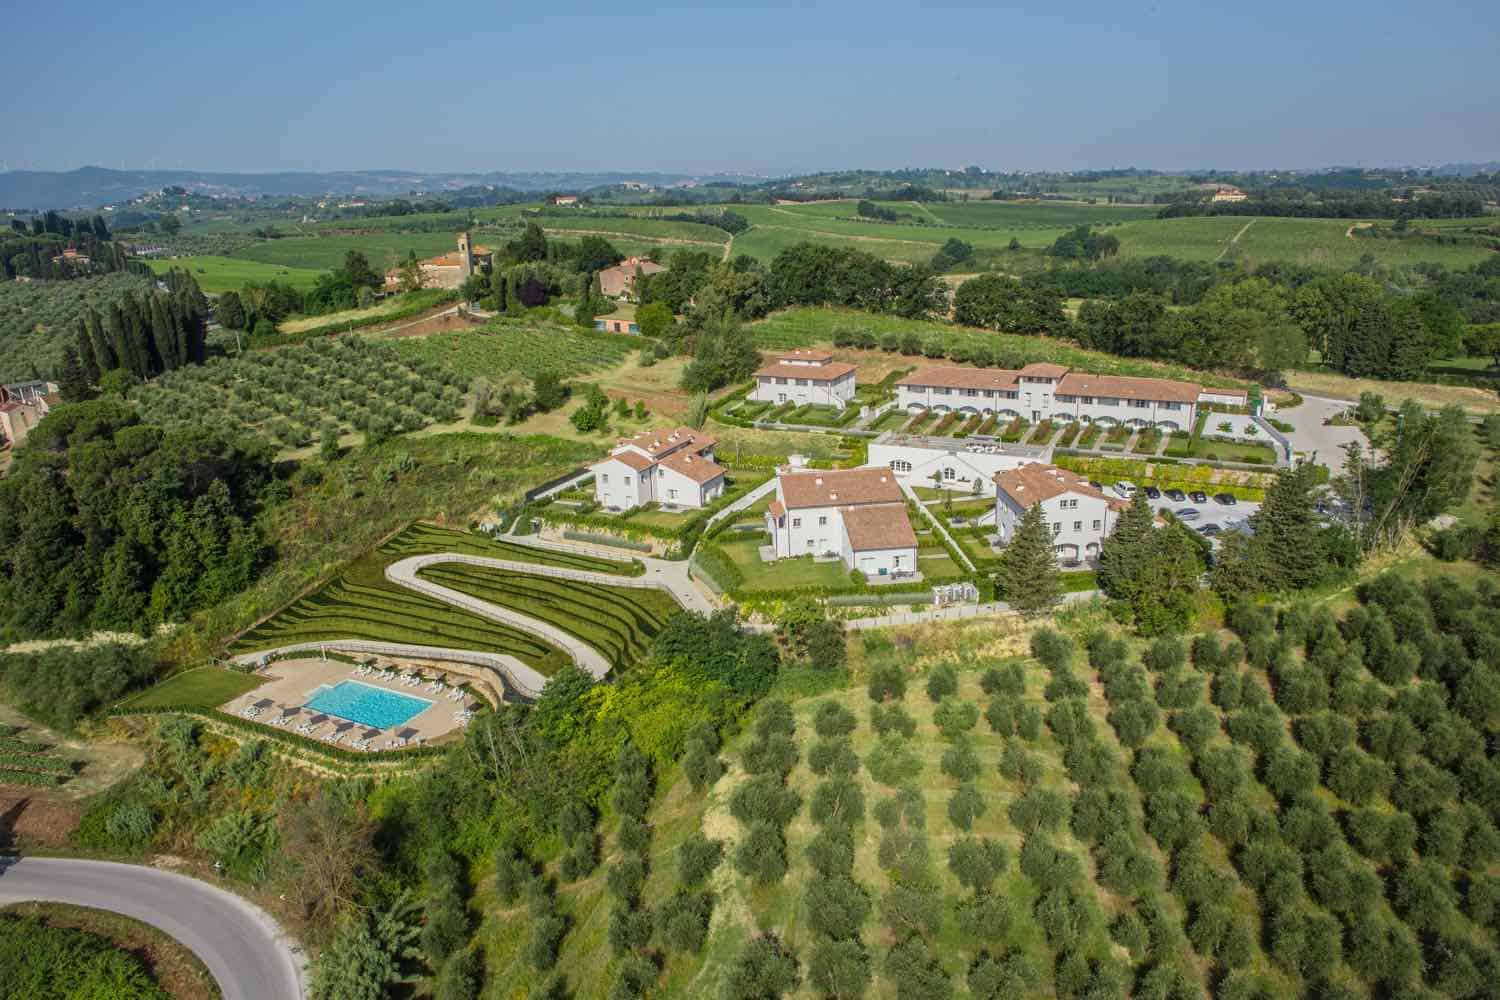 Aerial view of an Italian resort surrounded by olive trees and wine vineyards